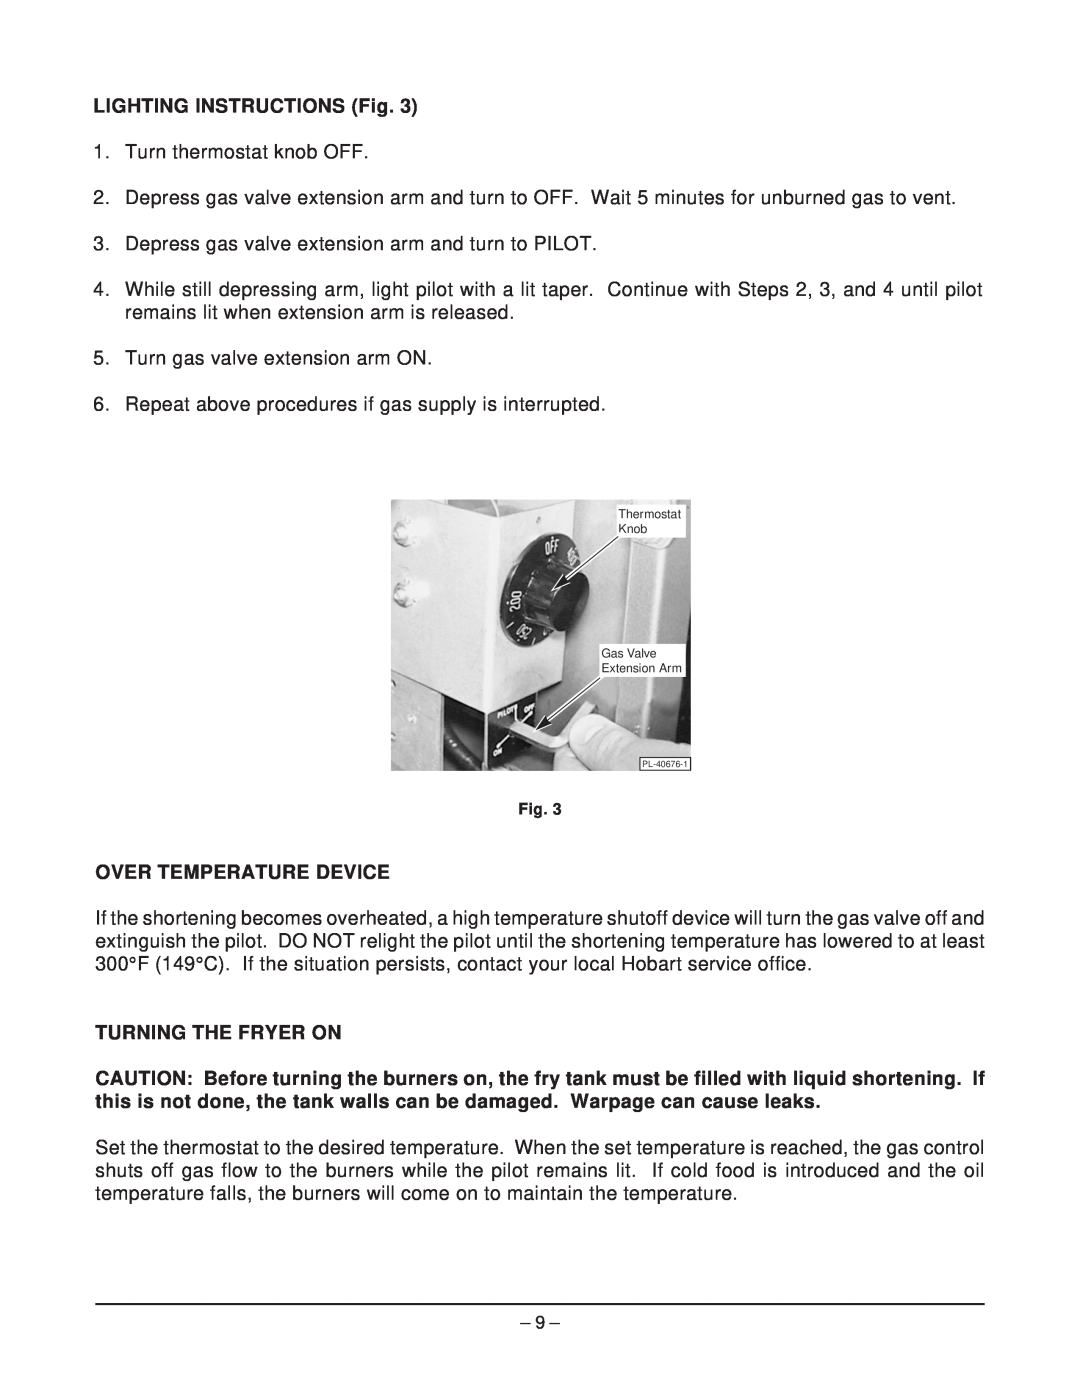 Hobart EFO40 manual LIGHTING INSTRUCTIONS Fig, Over Temperature Device, Turning The Fryer On 